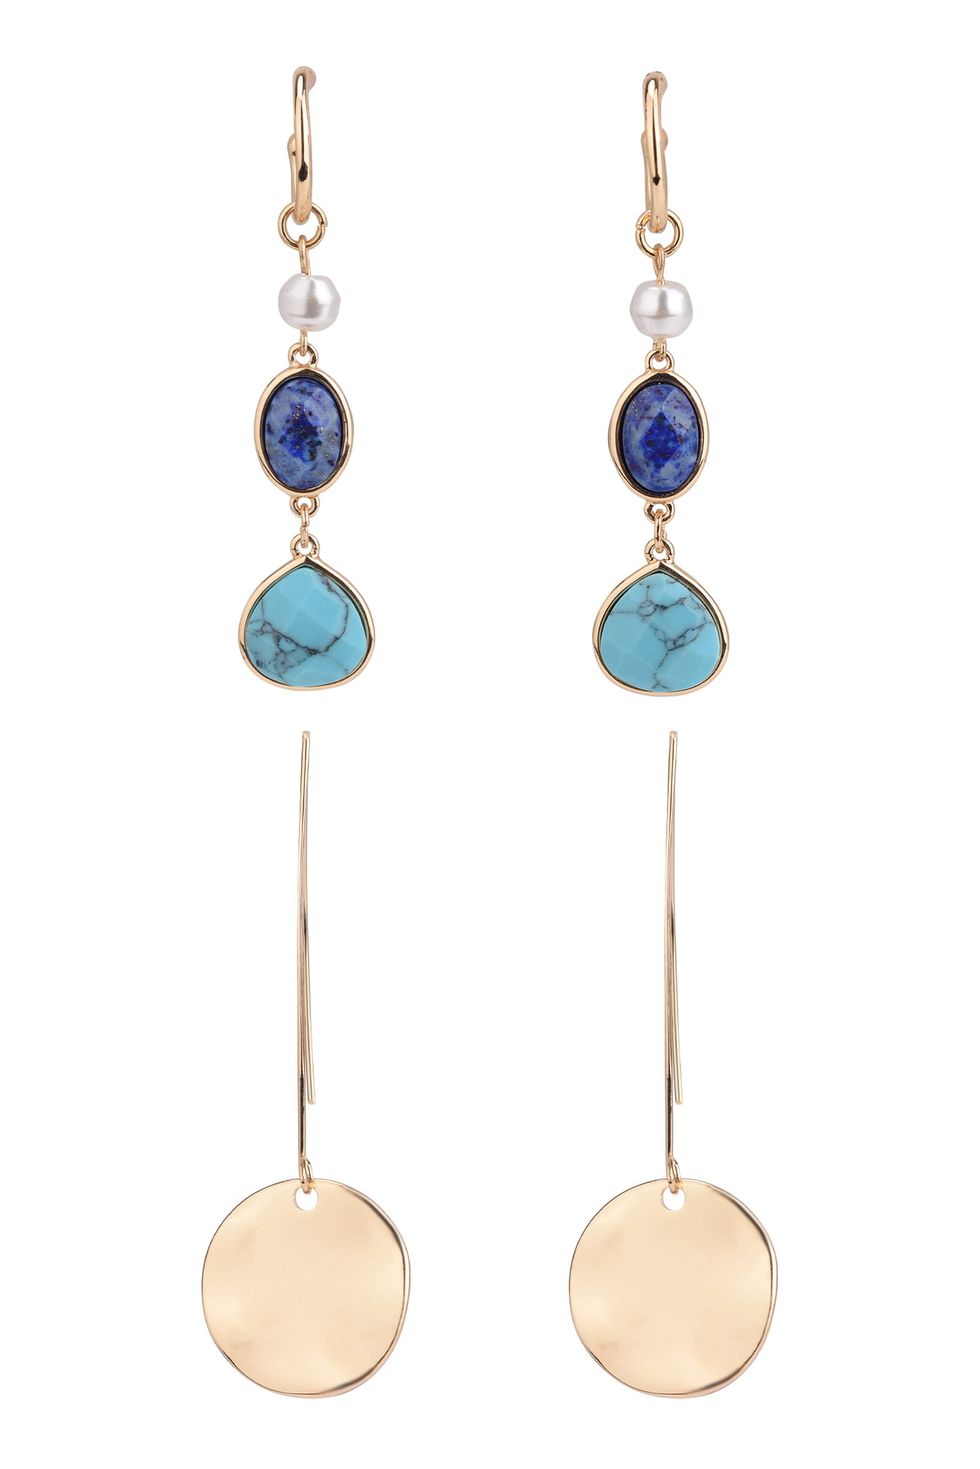 The Pioneer Woman Gold-Tone Earring Set